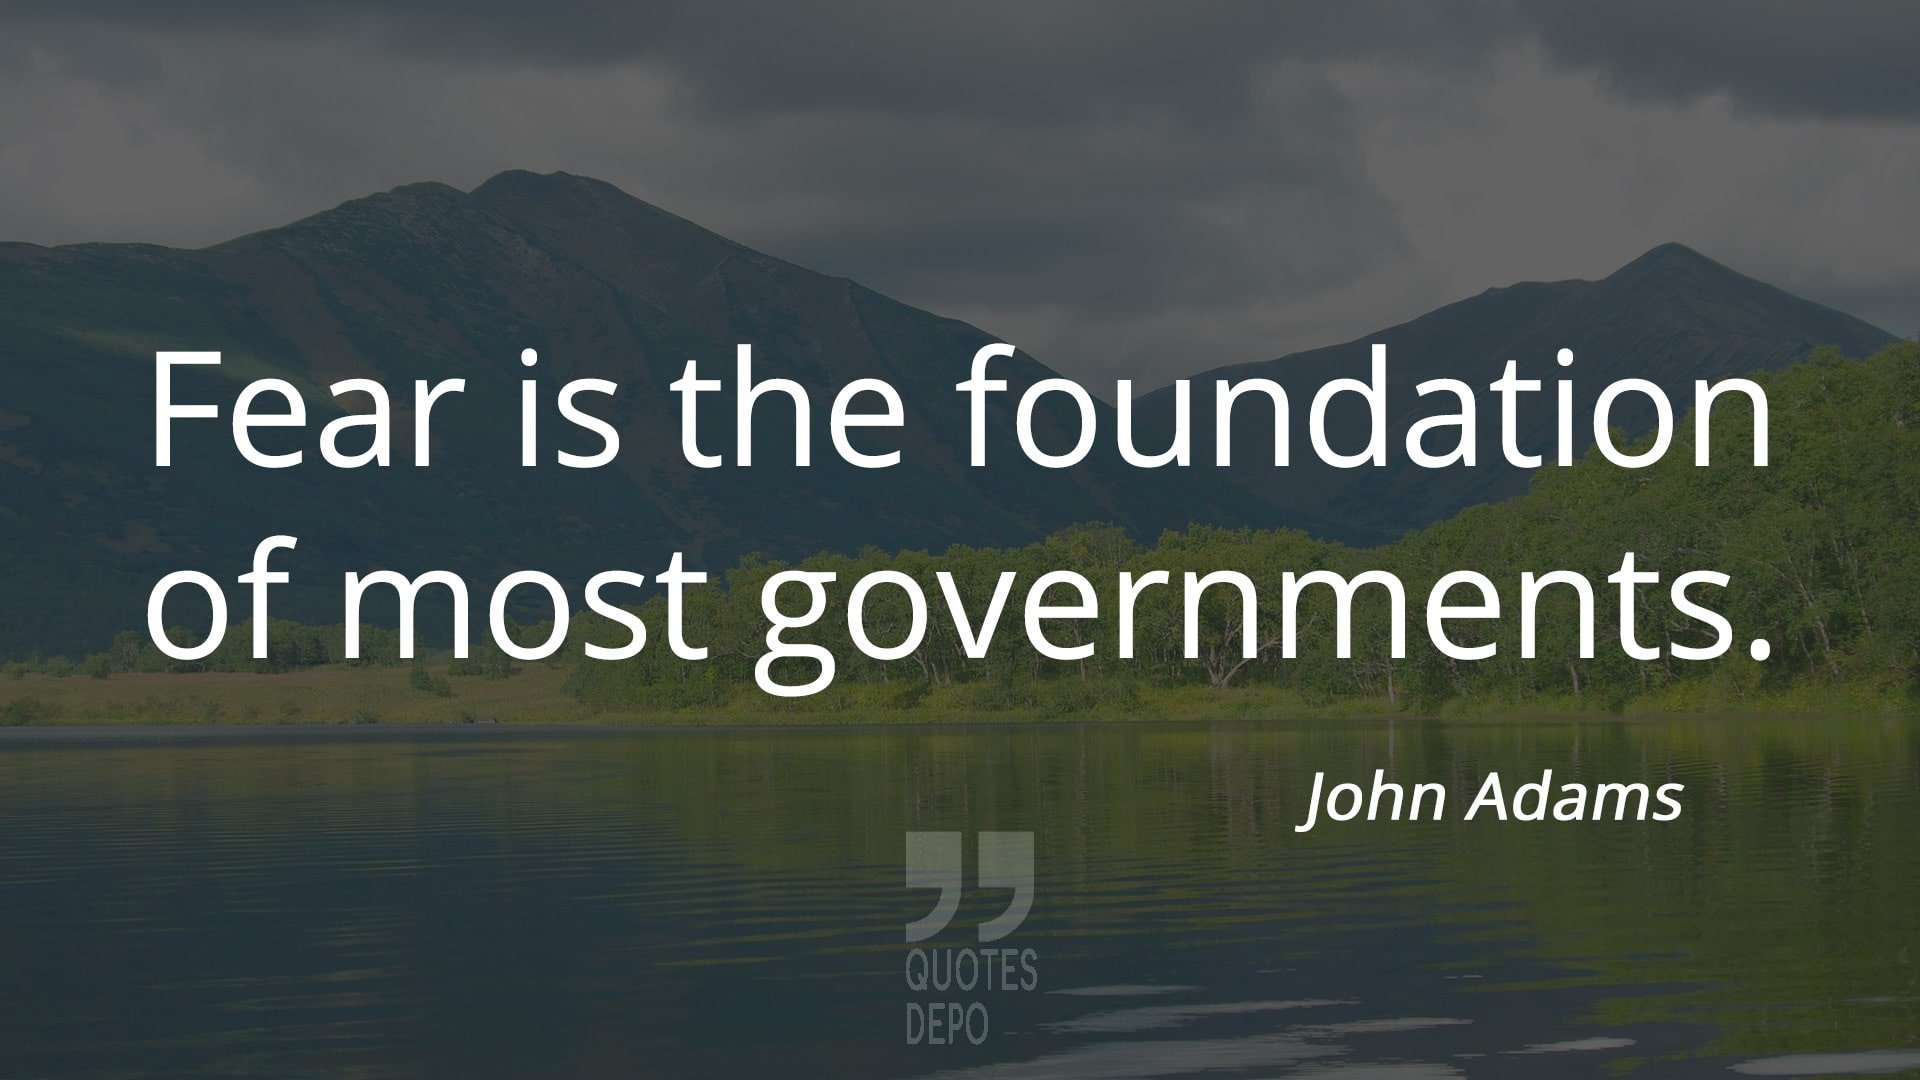 fear is the foundation of most governments - john adams quotes